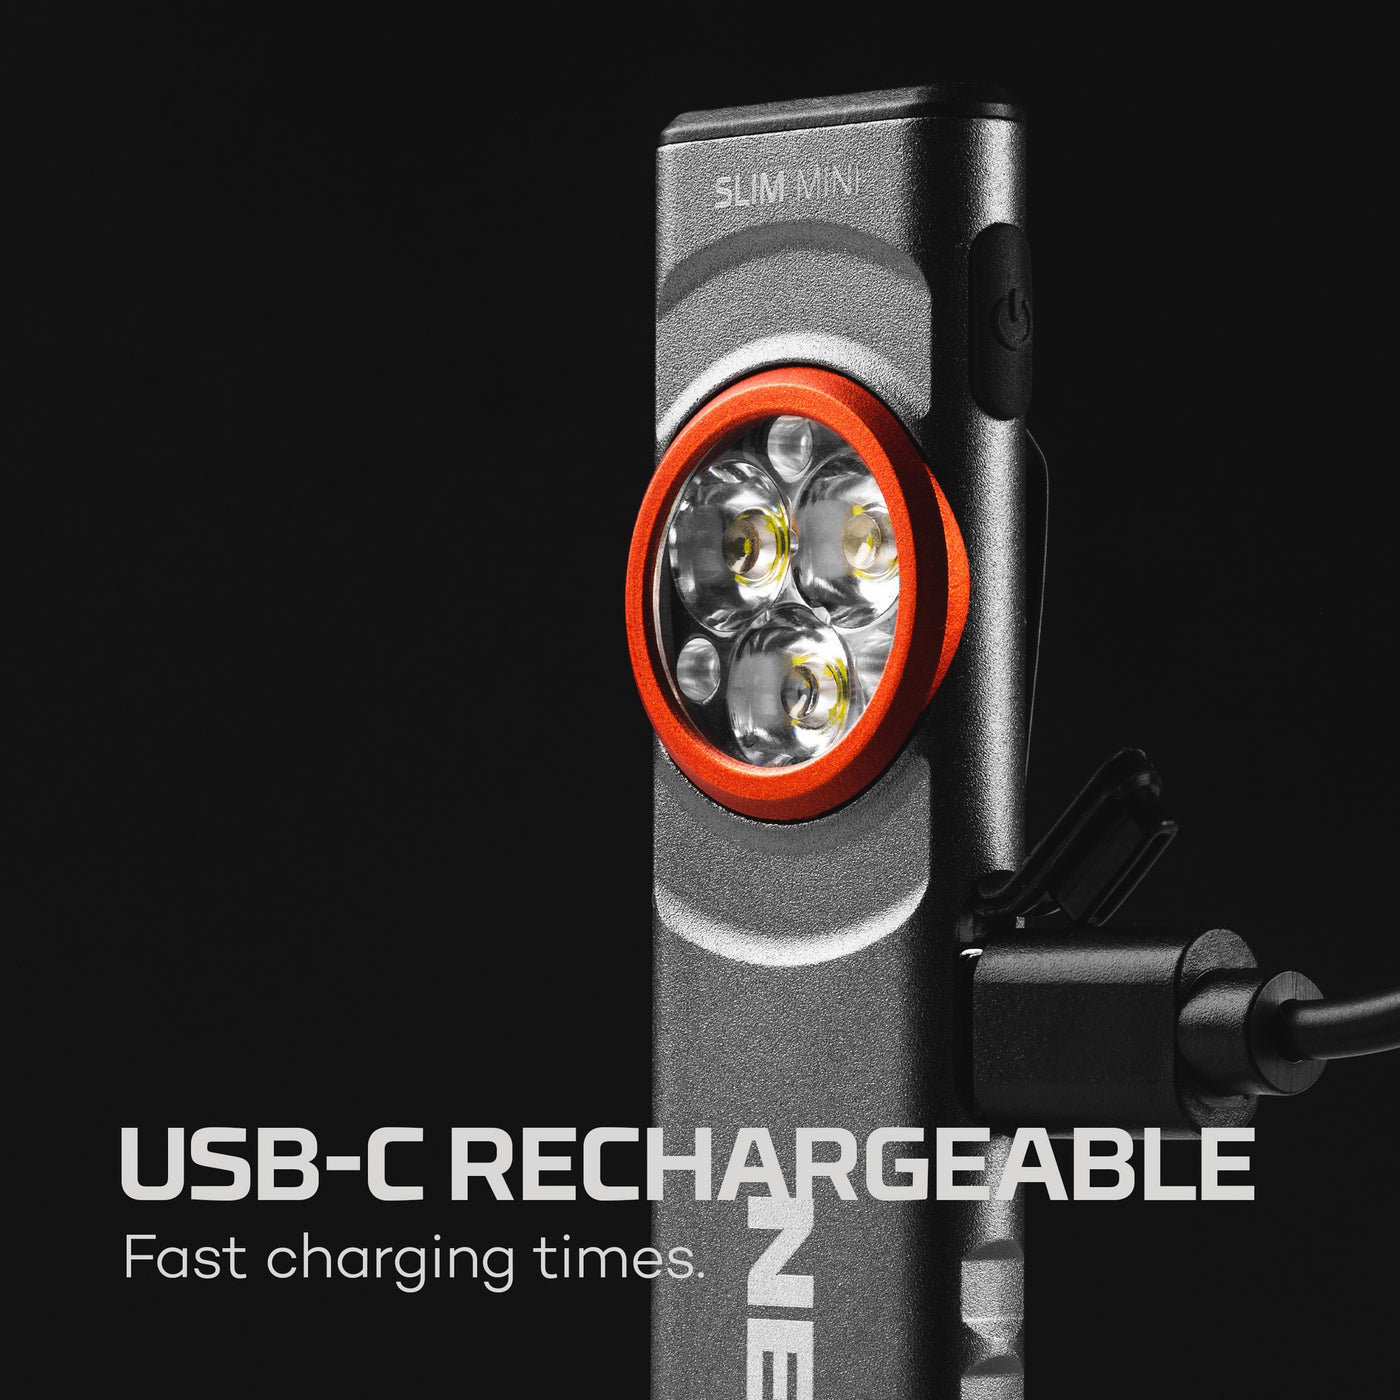 NEBO SLIM Mini rechargeable USB-C for 2 hour charge time